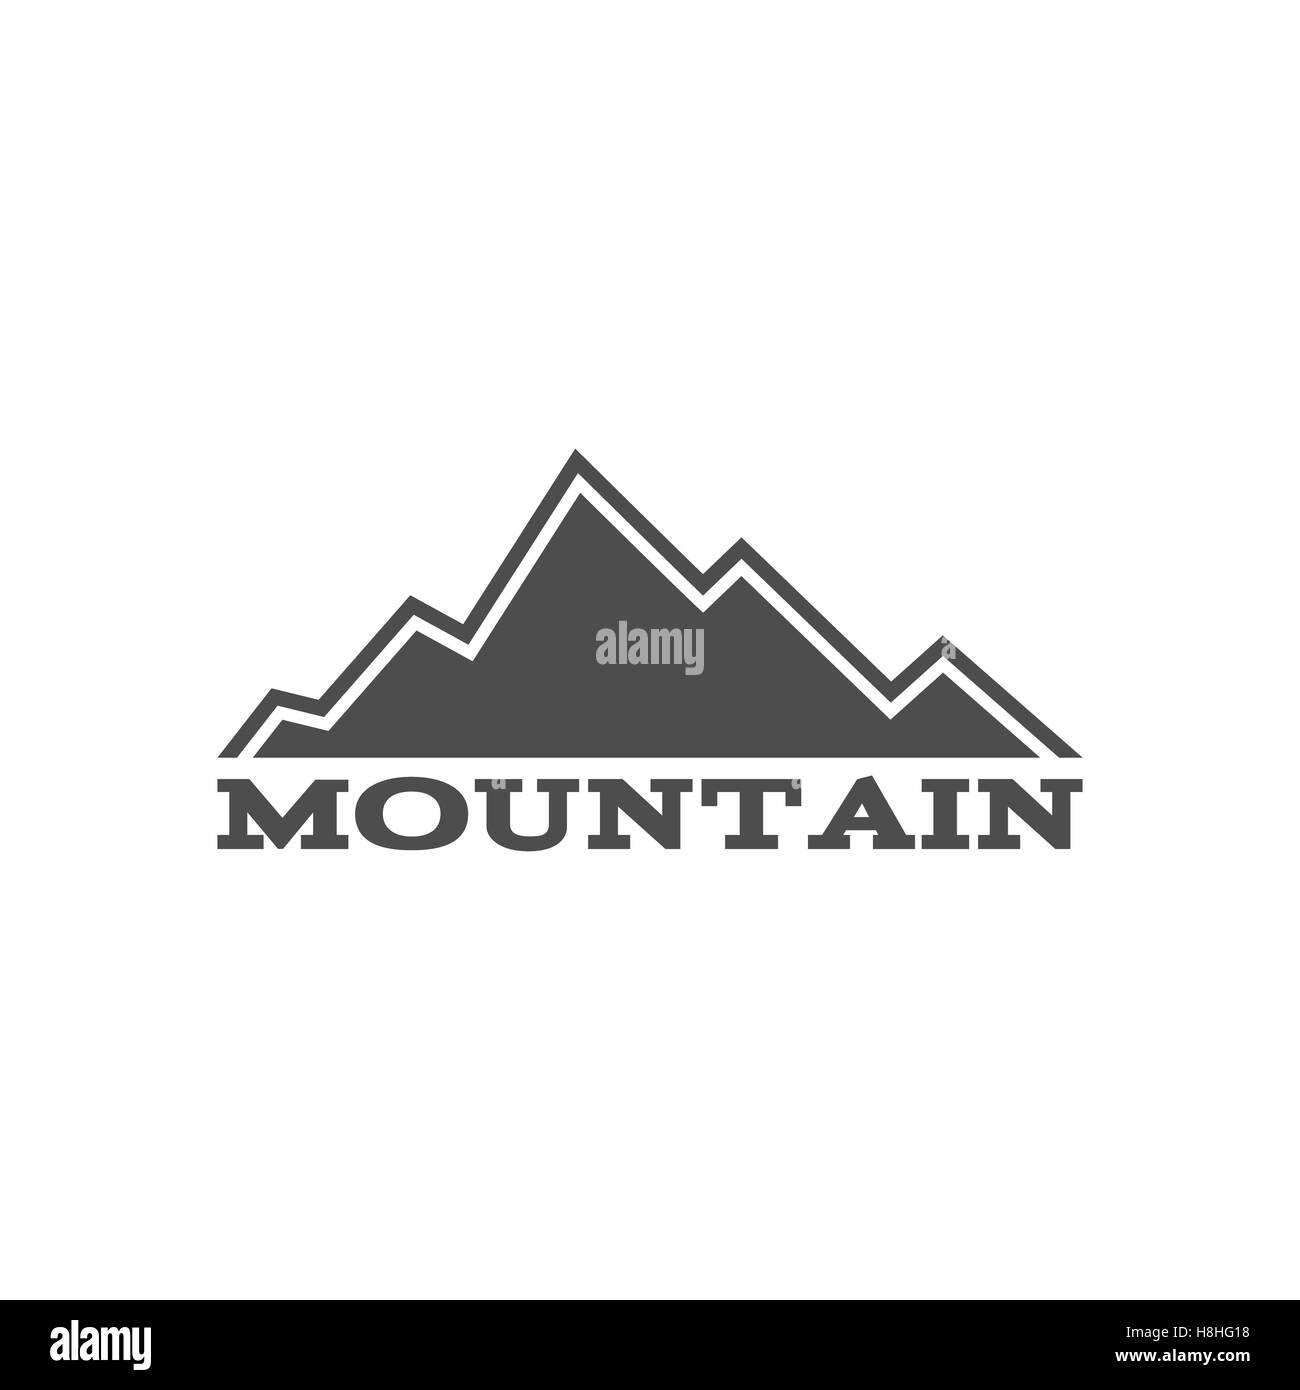 Mountain badge. Wilderness mountains old style typography label. Letterpress Print Rubber Stamp Effect. Retro mountain logo design. Inspirational vintage mountain hipster brand design Stock Photo